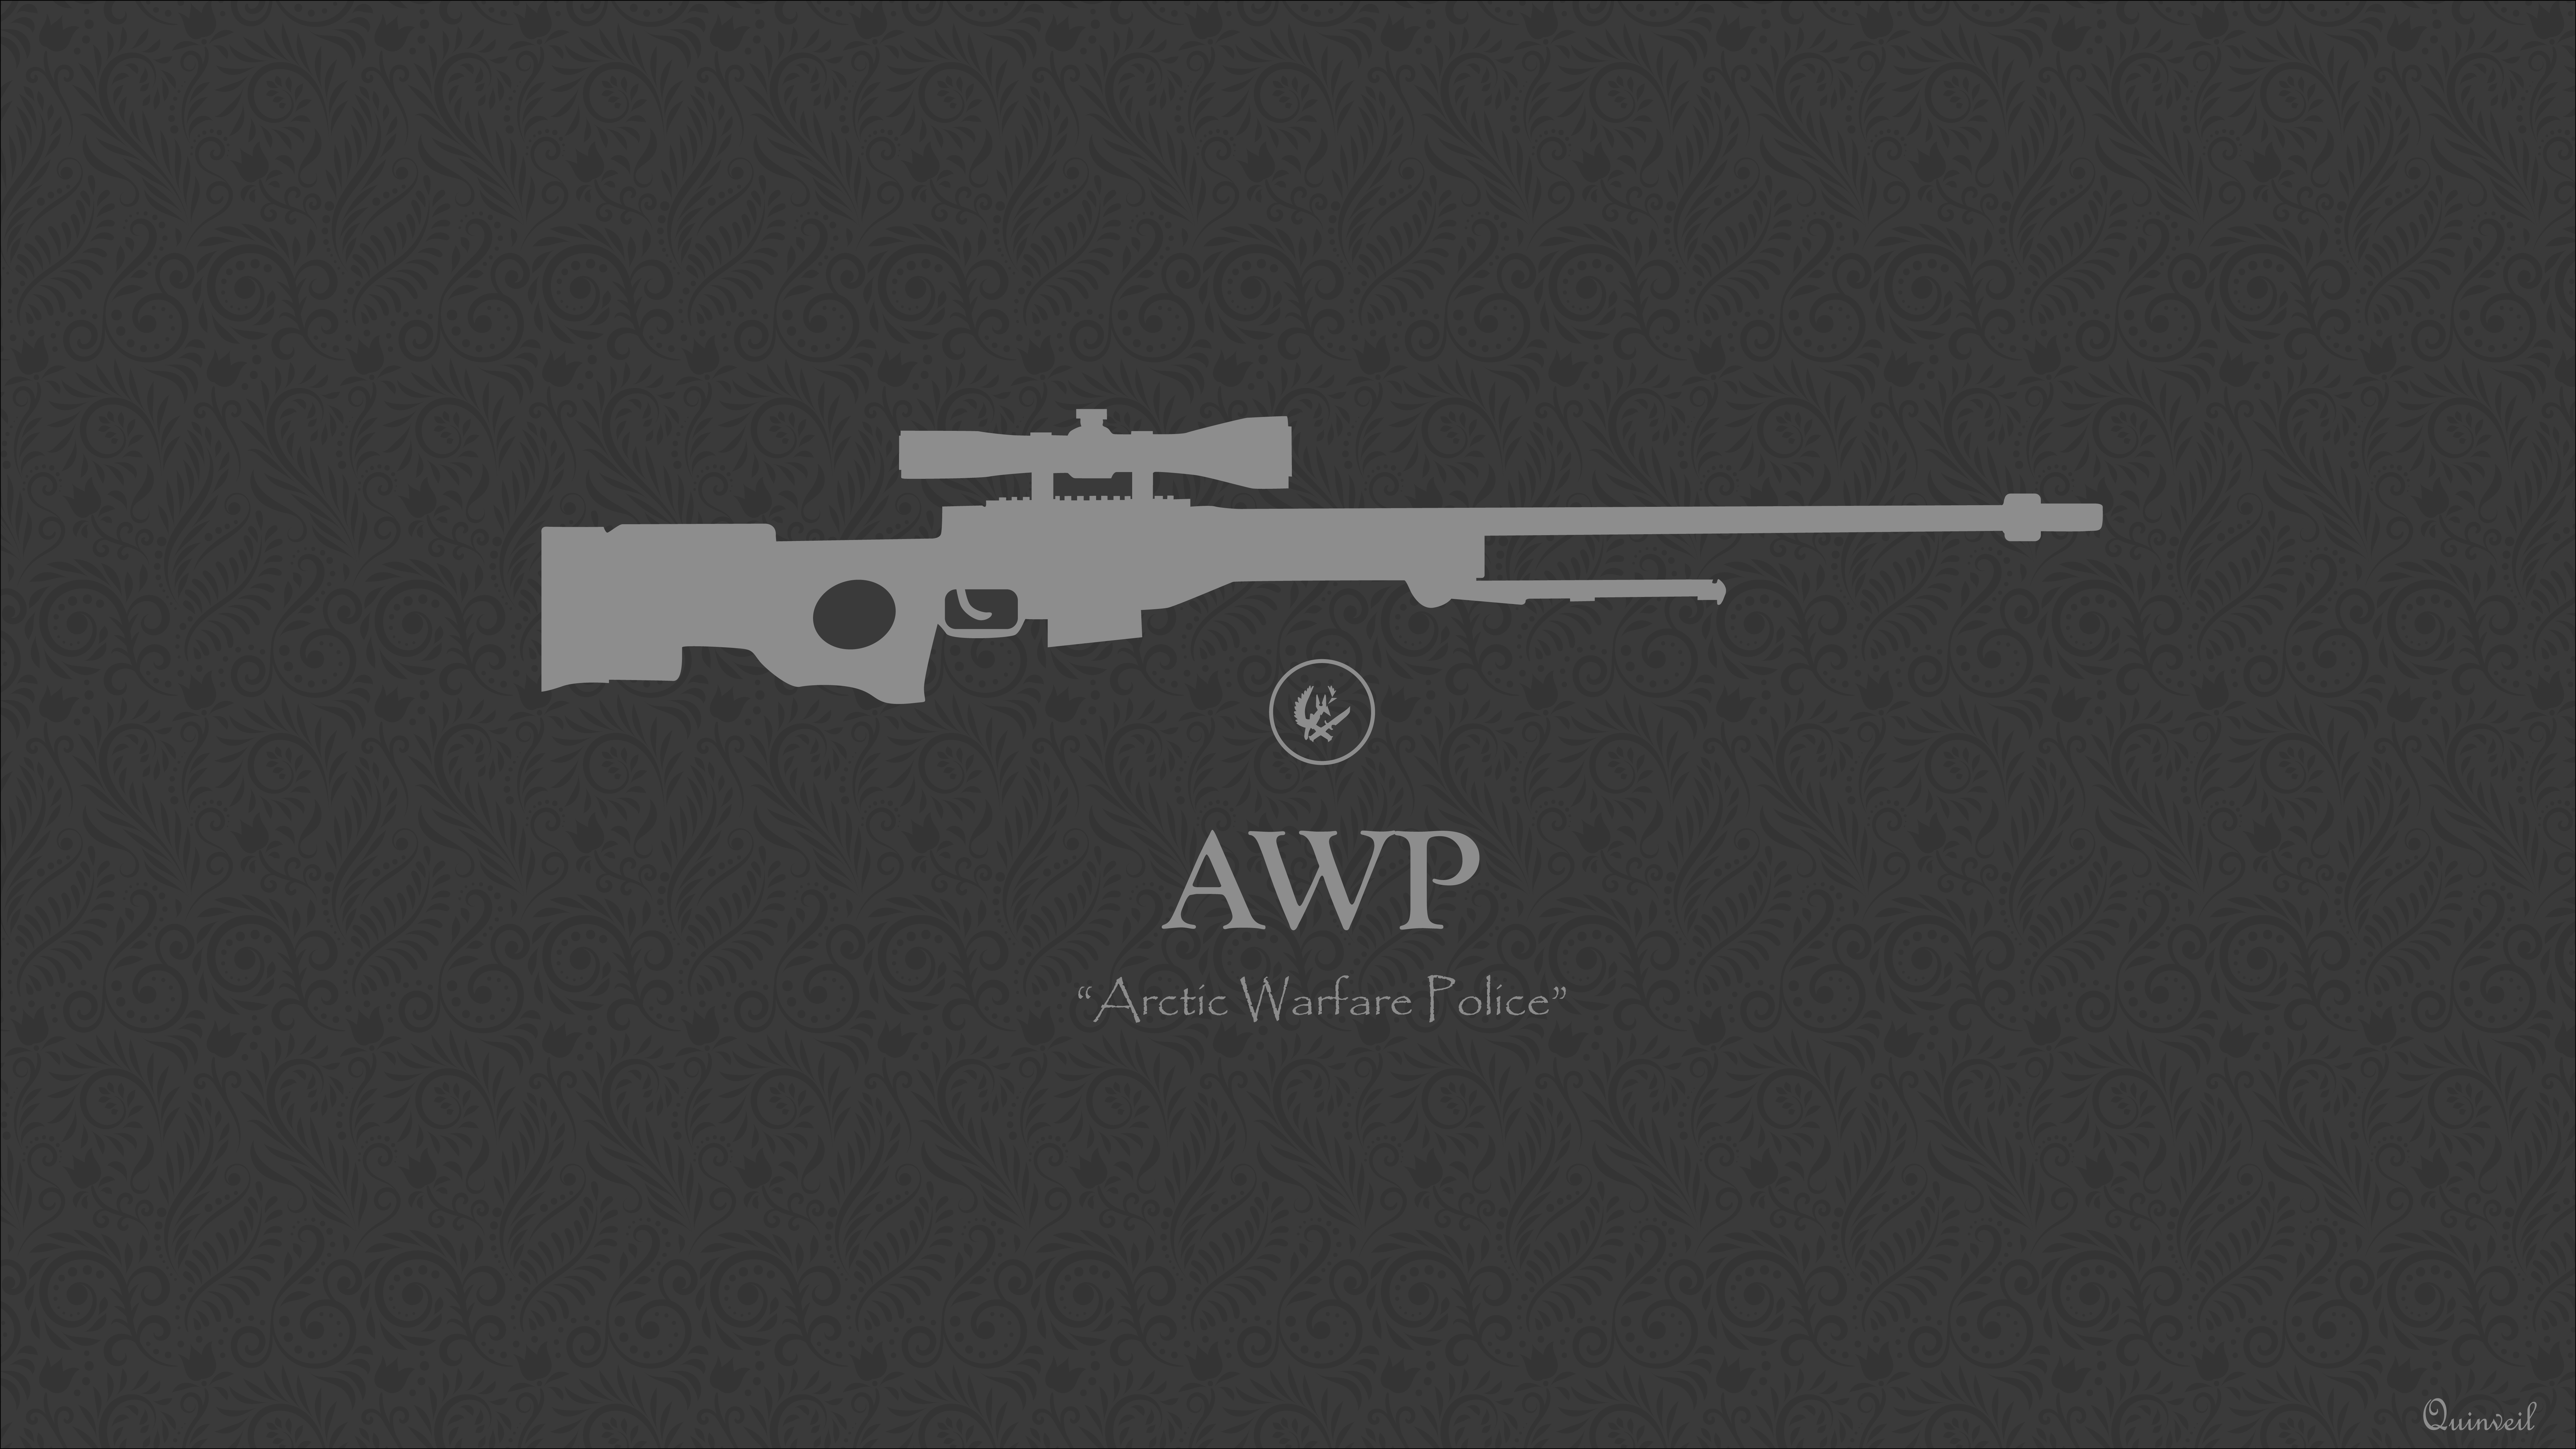 General 8000x4500 game logo Counter-Strike: Global Offensive Accuracy International AWP vintage military text caption watermarked digital art simple background